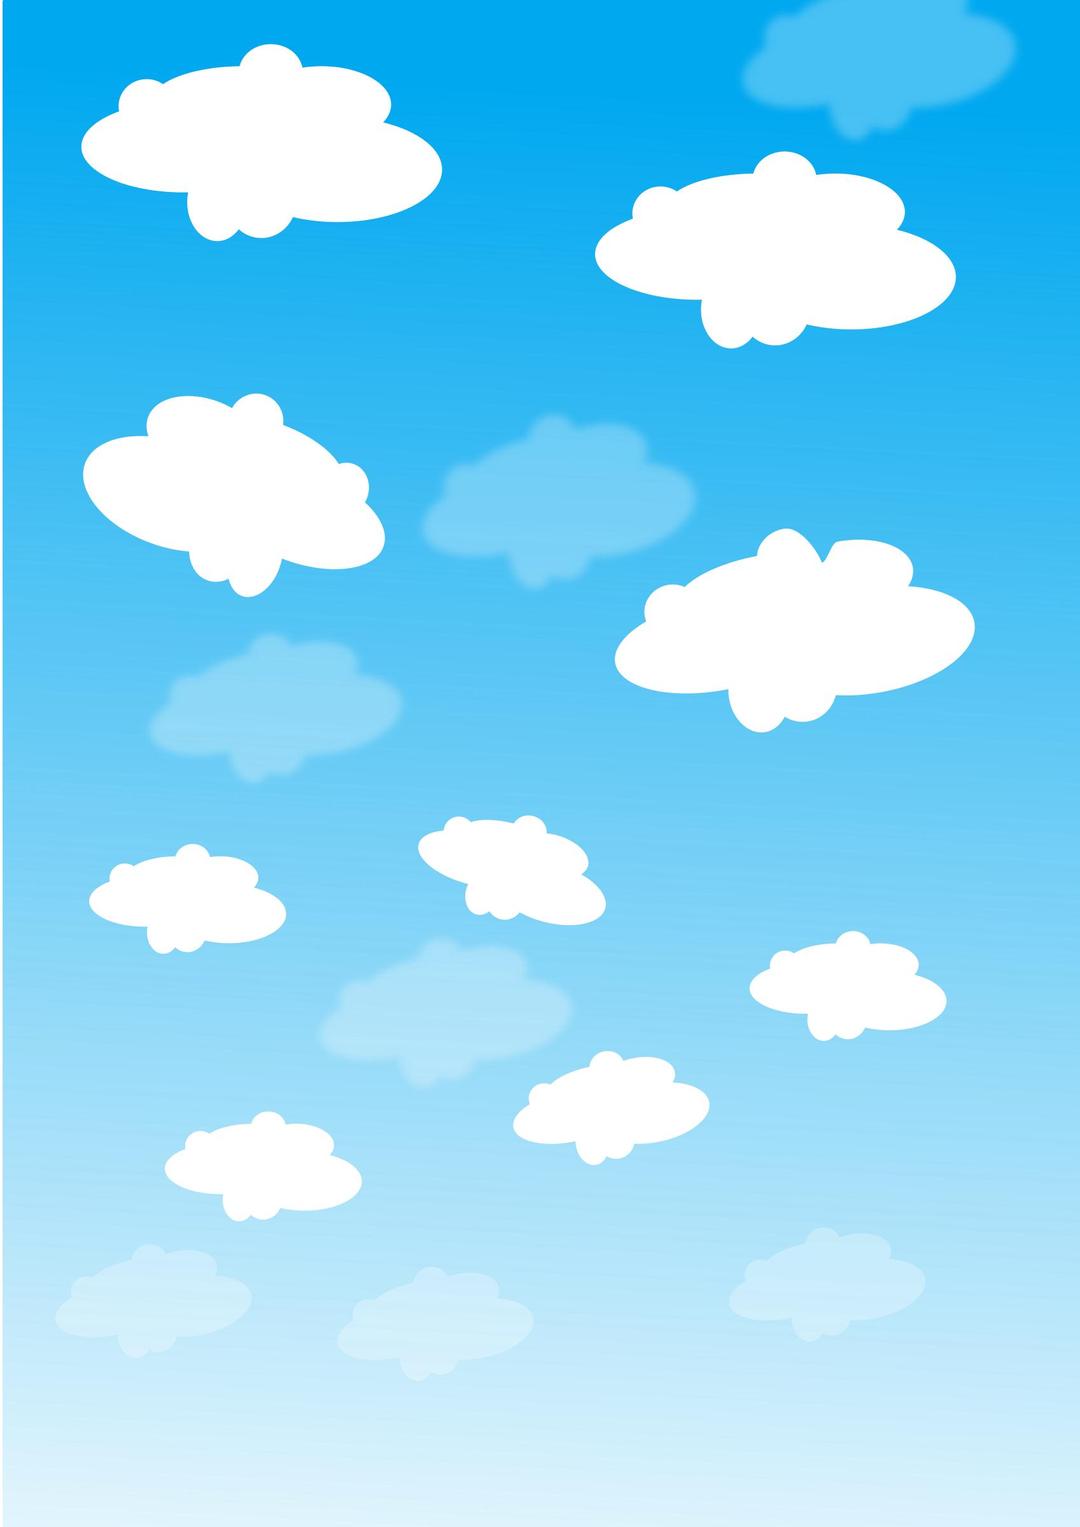 sky with clouds png transparent